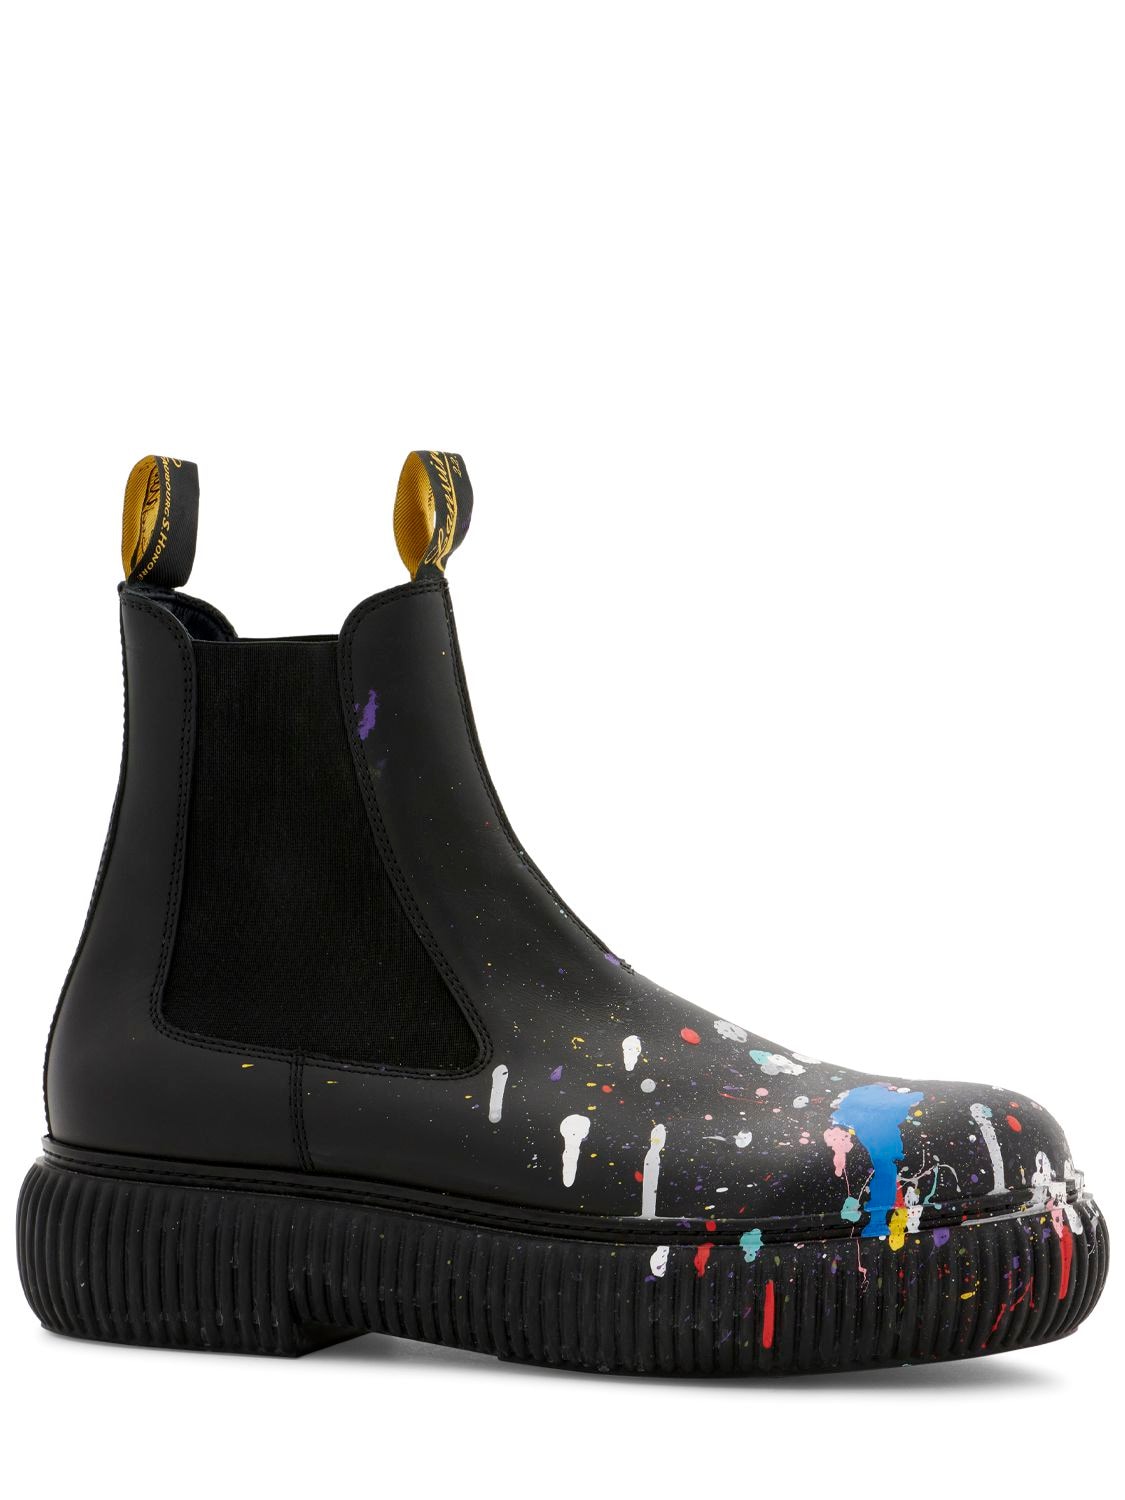 GALLERY DEPT X LANVIN Printed Leather Chelsea Boots